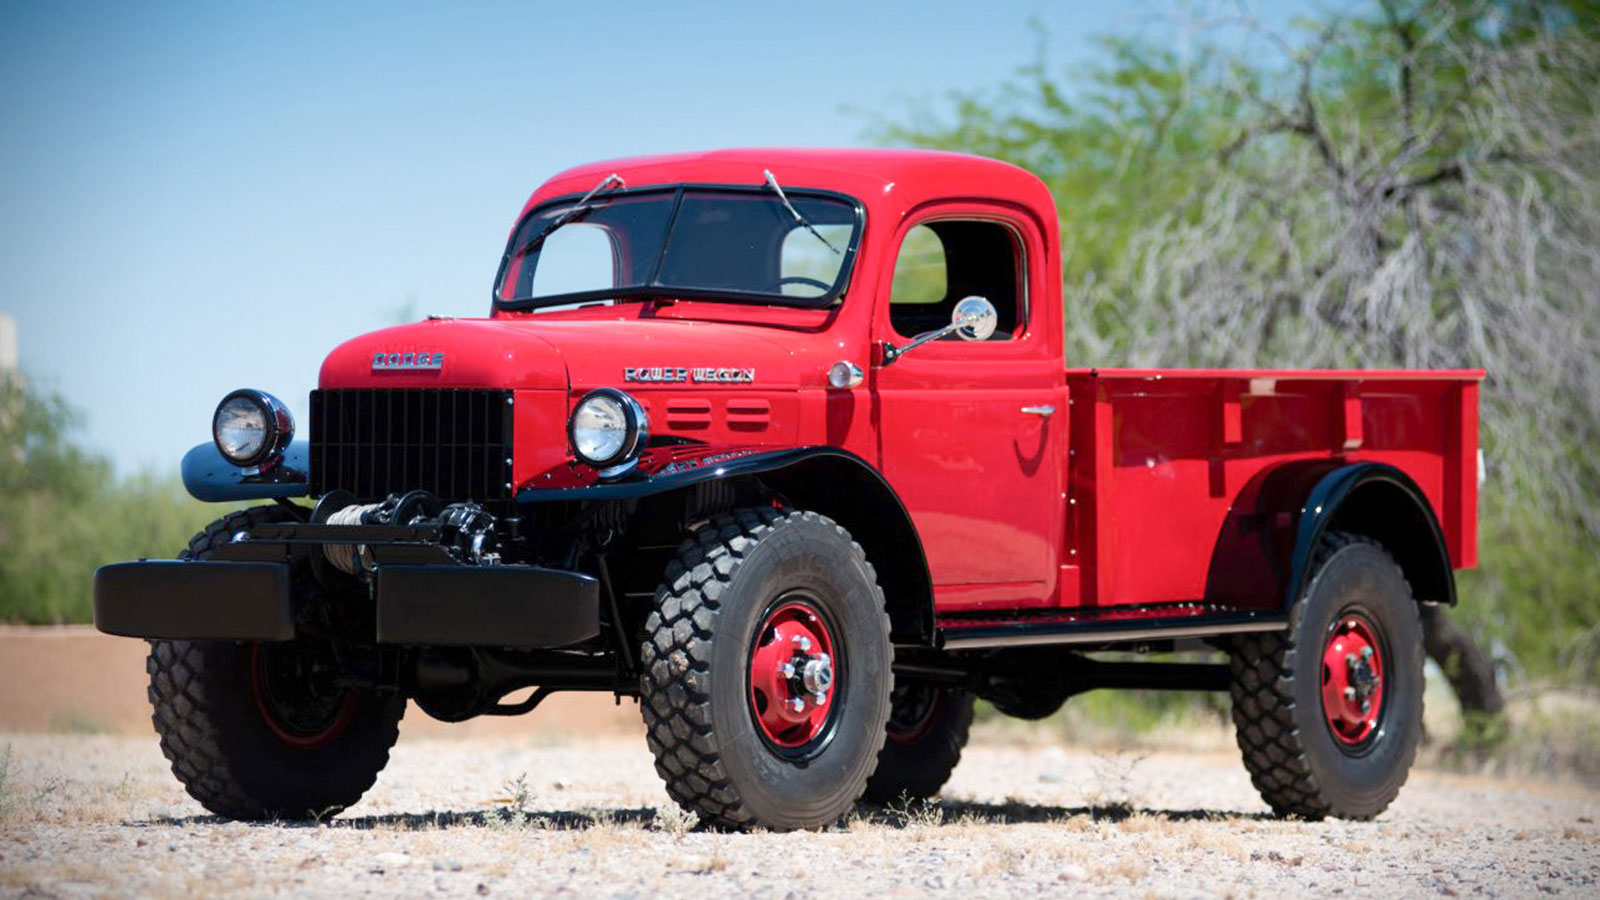 1947 DODGE POWER WAGON PICKUP UP FOR AUCTION